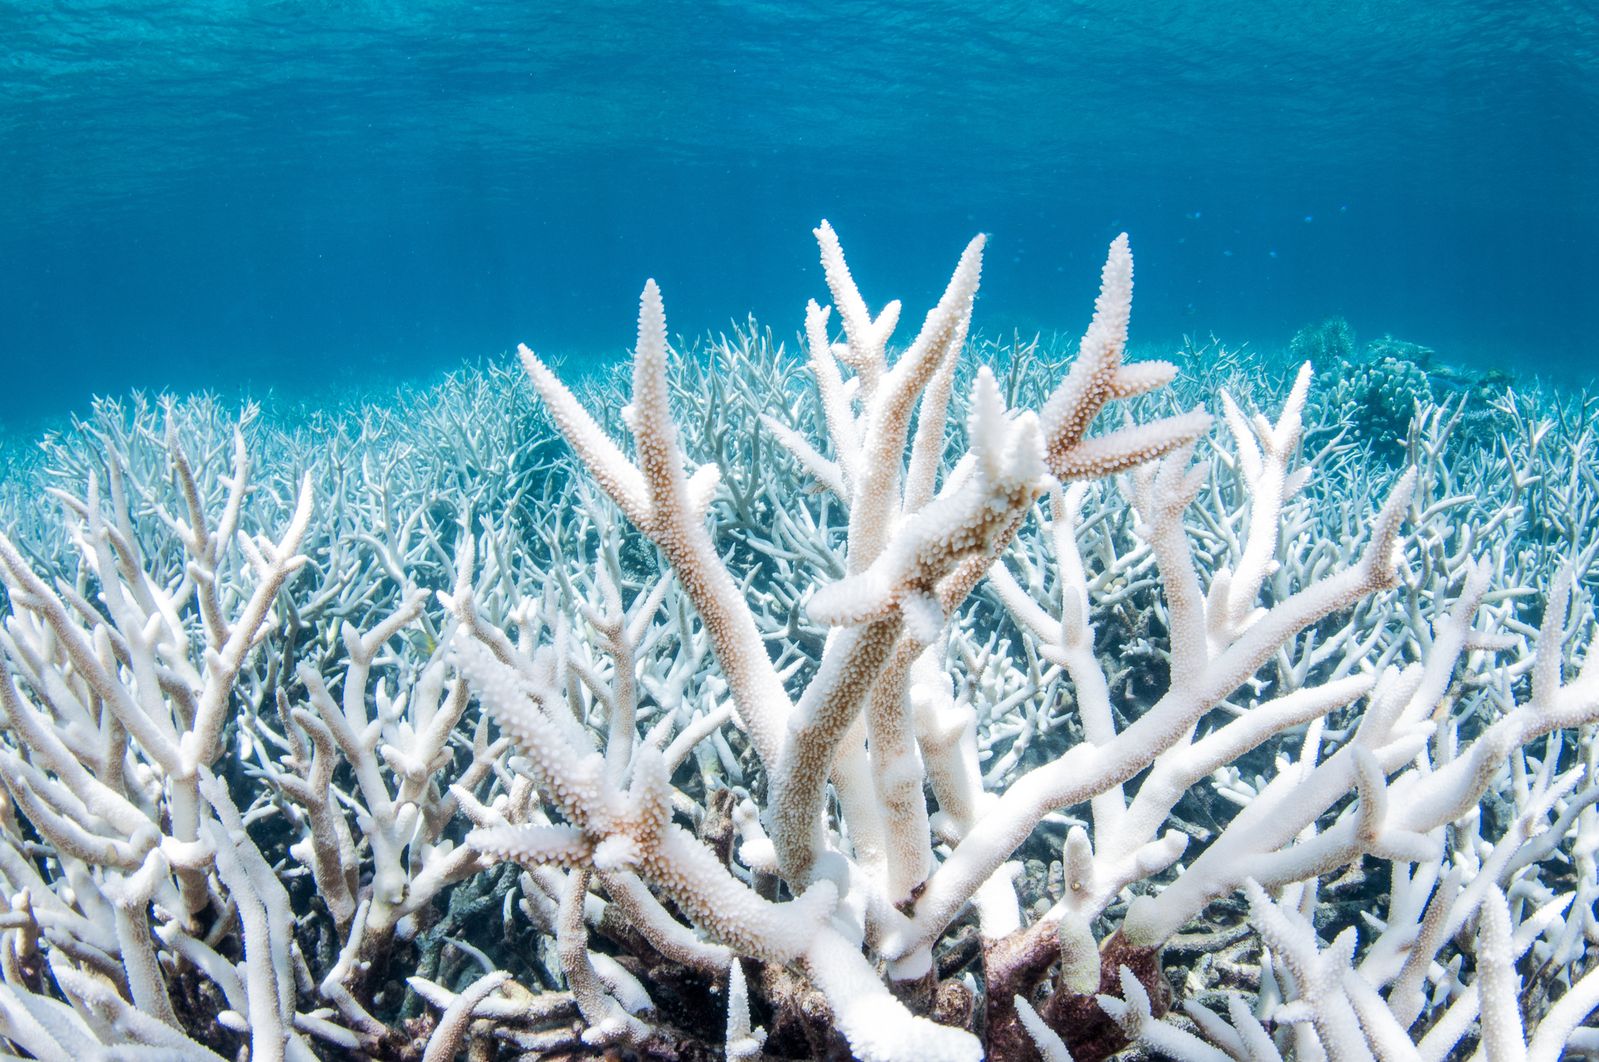 The World's Fourth Mass Coral Bleaching Event Is Underway—and It Could Become the Worst One Yet